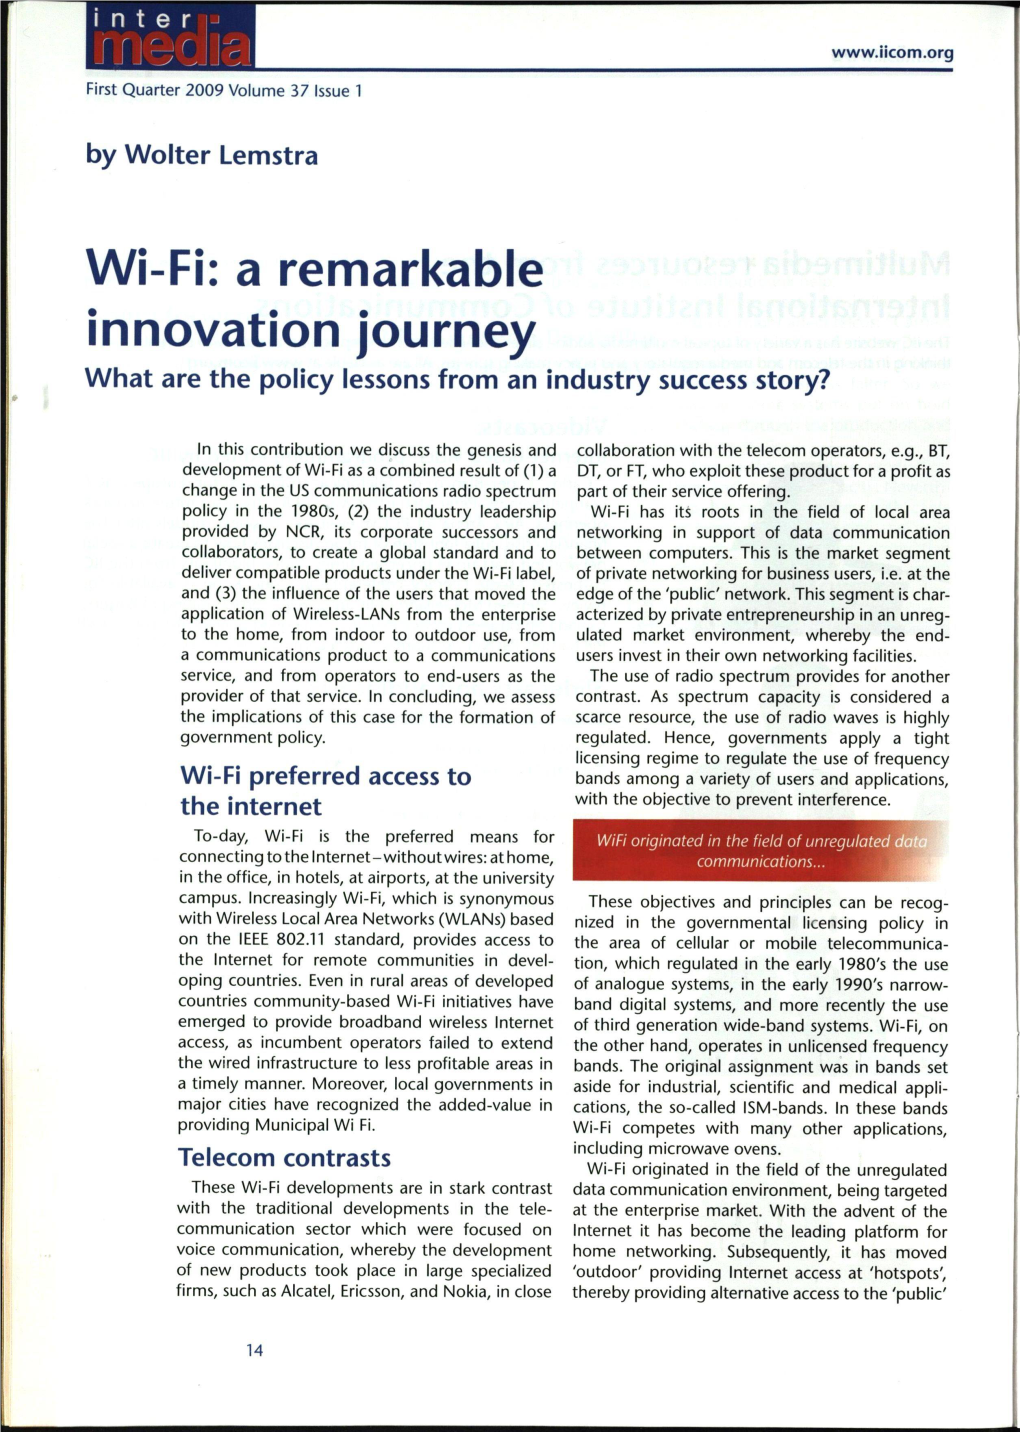 Wi-Fi: a Remarkable Innovation Journey What Are the Policy Lessons from an Industry Success Story?